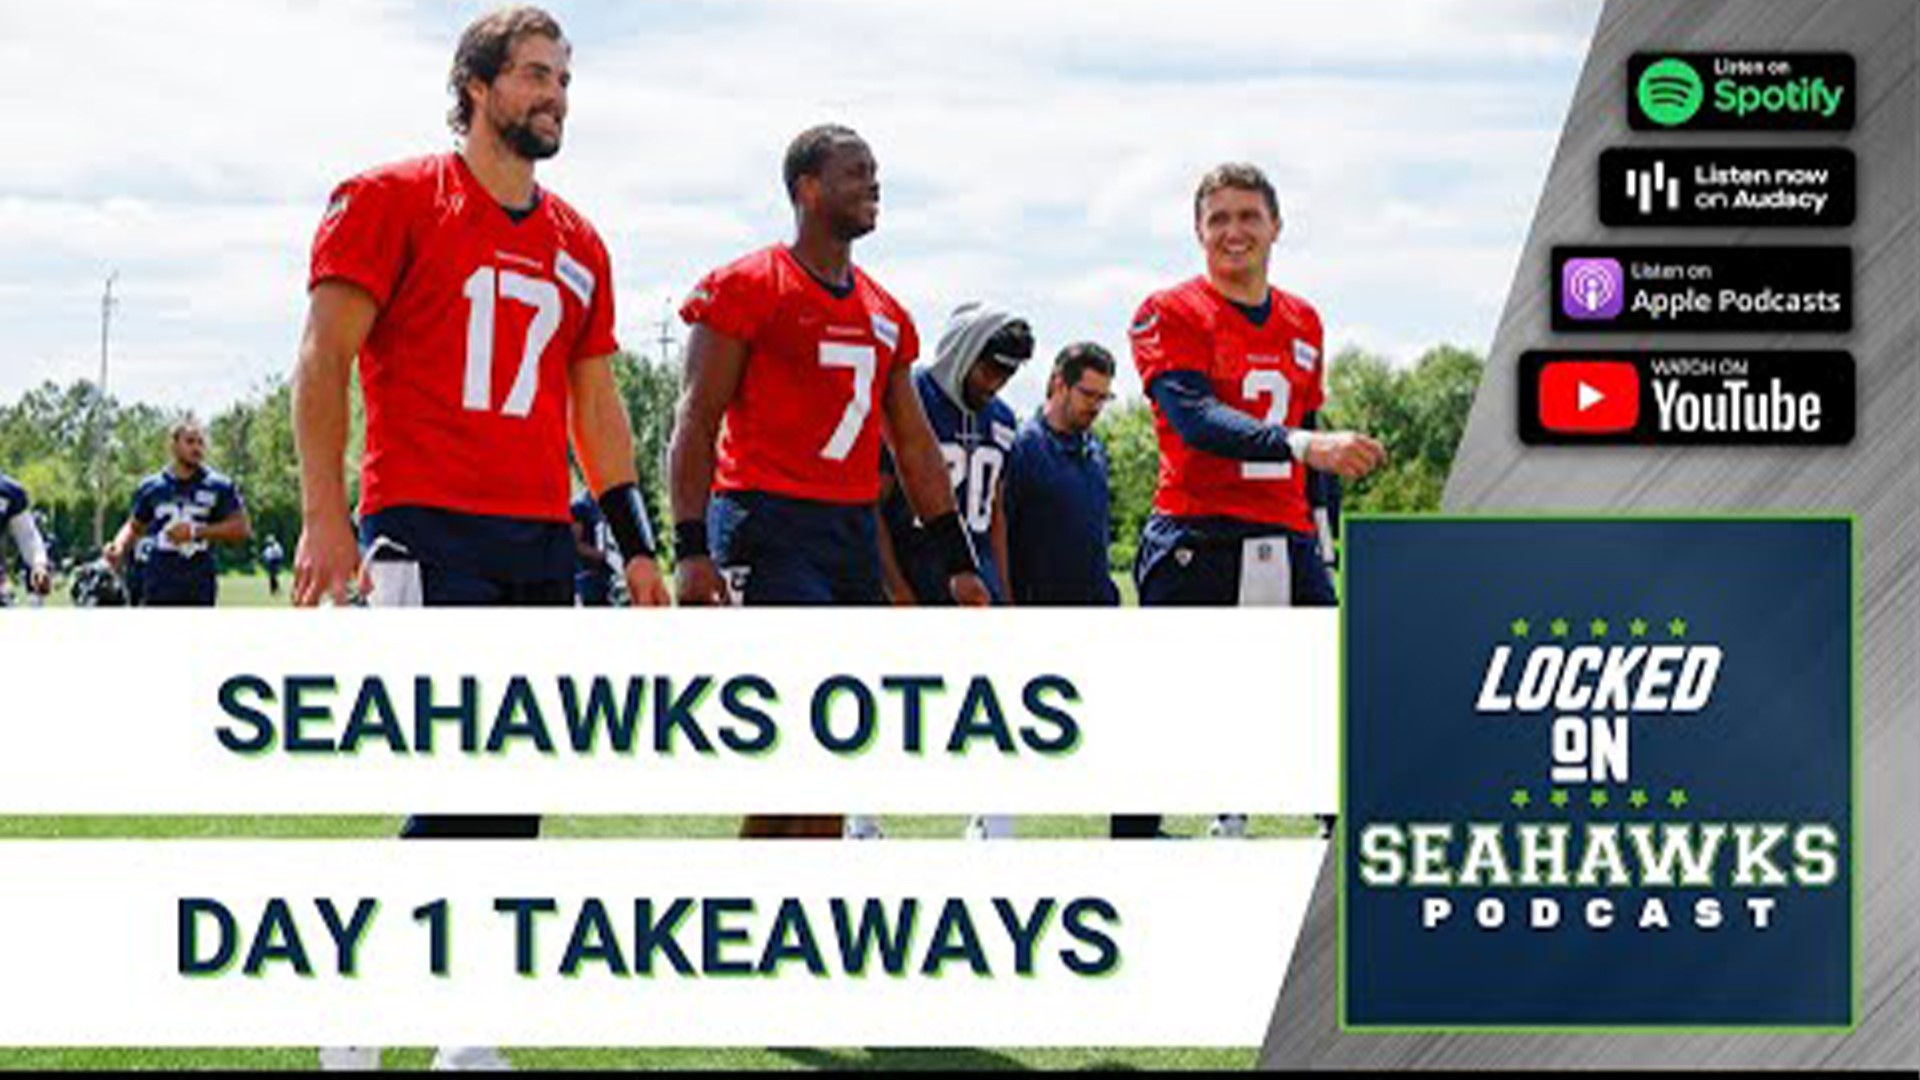 Moving into the third and final phase of their offseason program, the Seahawks returned to the field on Monday for the first of 10 organized team activity practices.